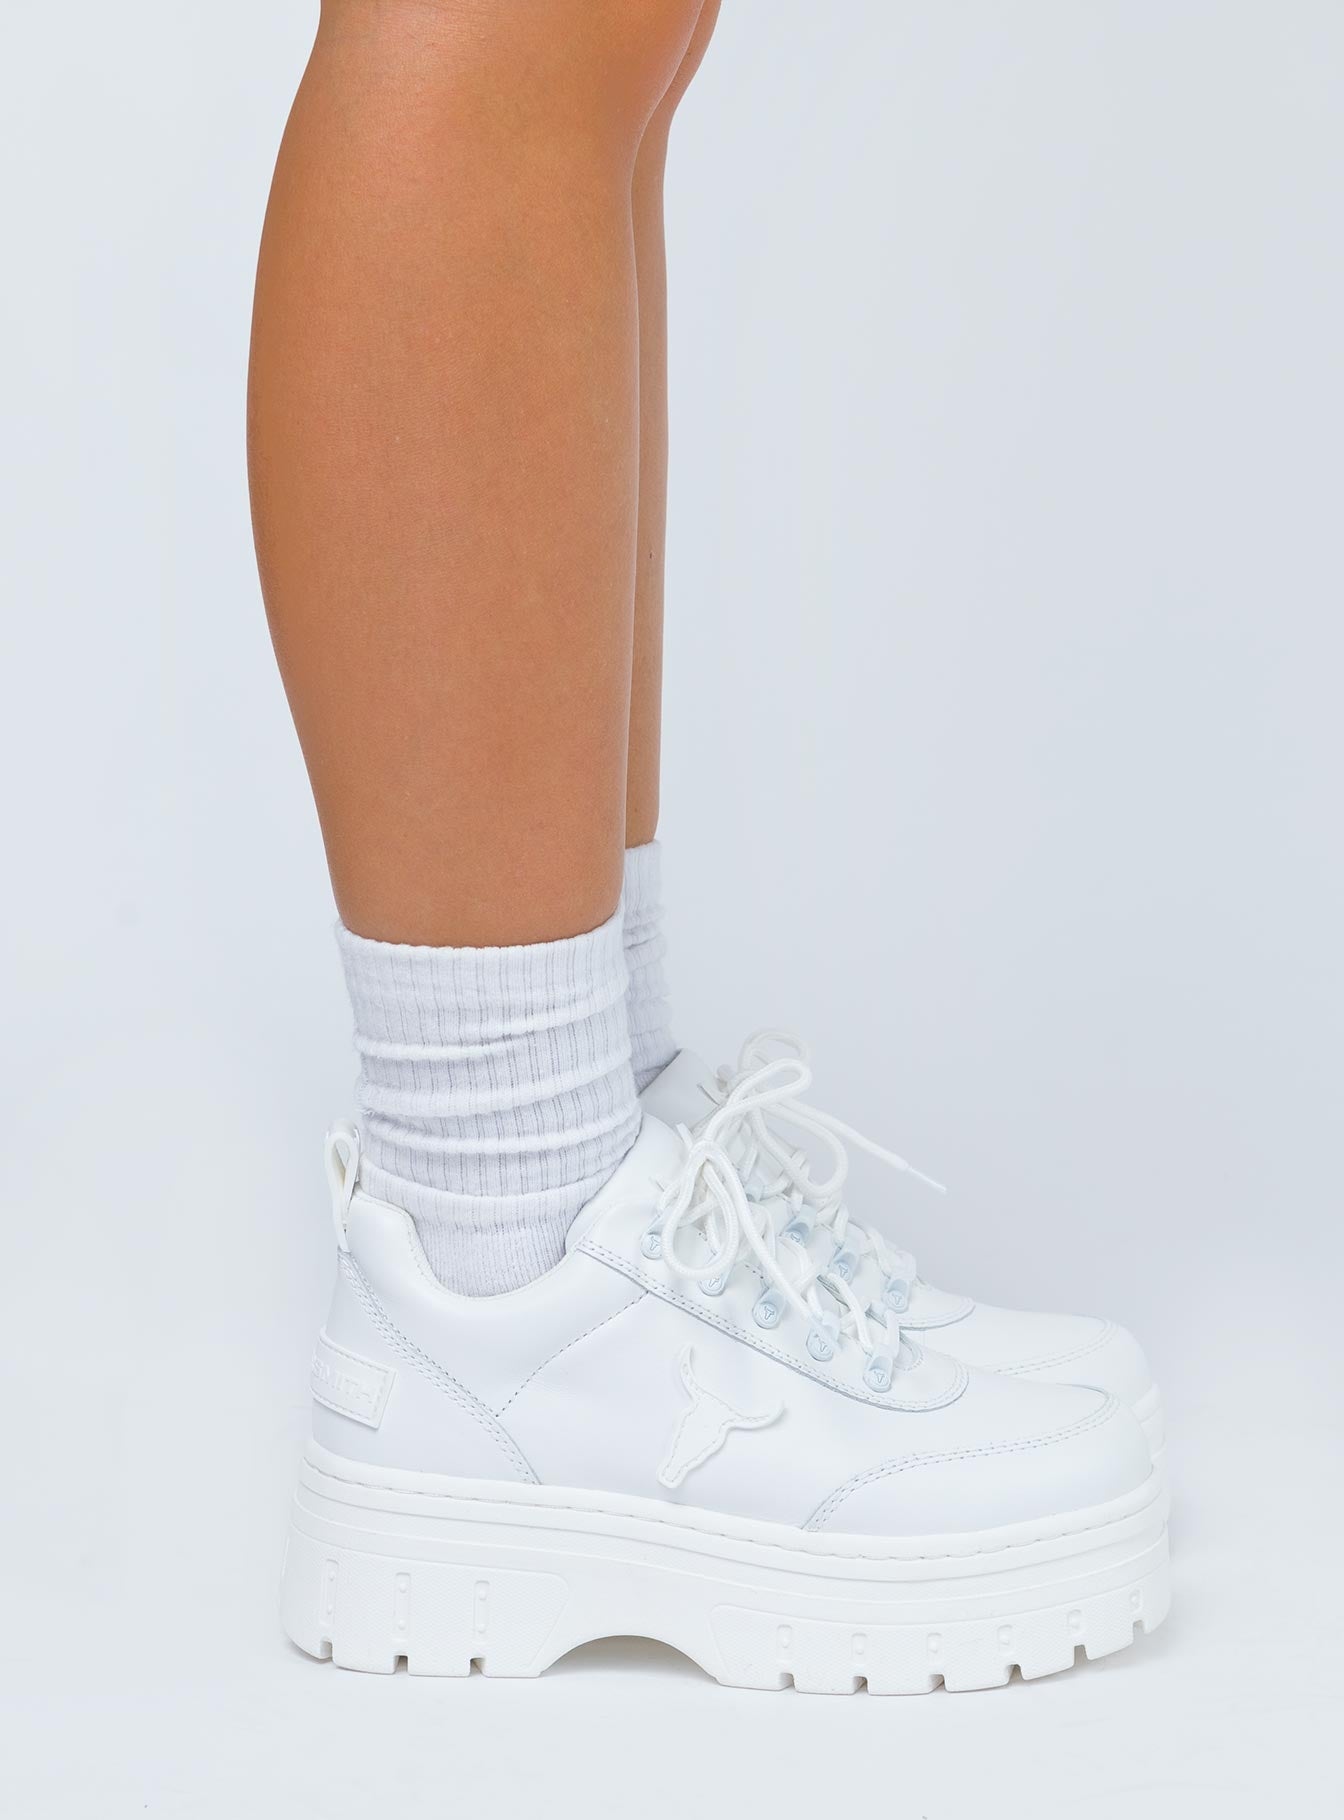 windsor smith womens sneakers